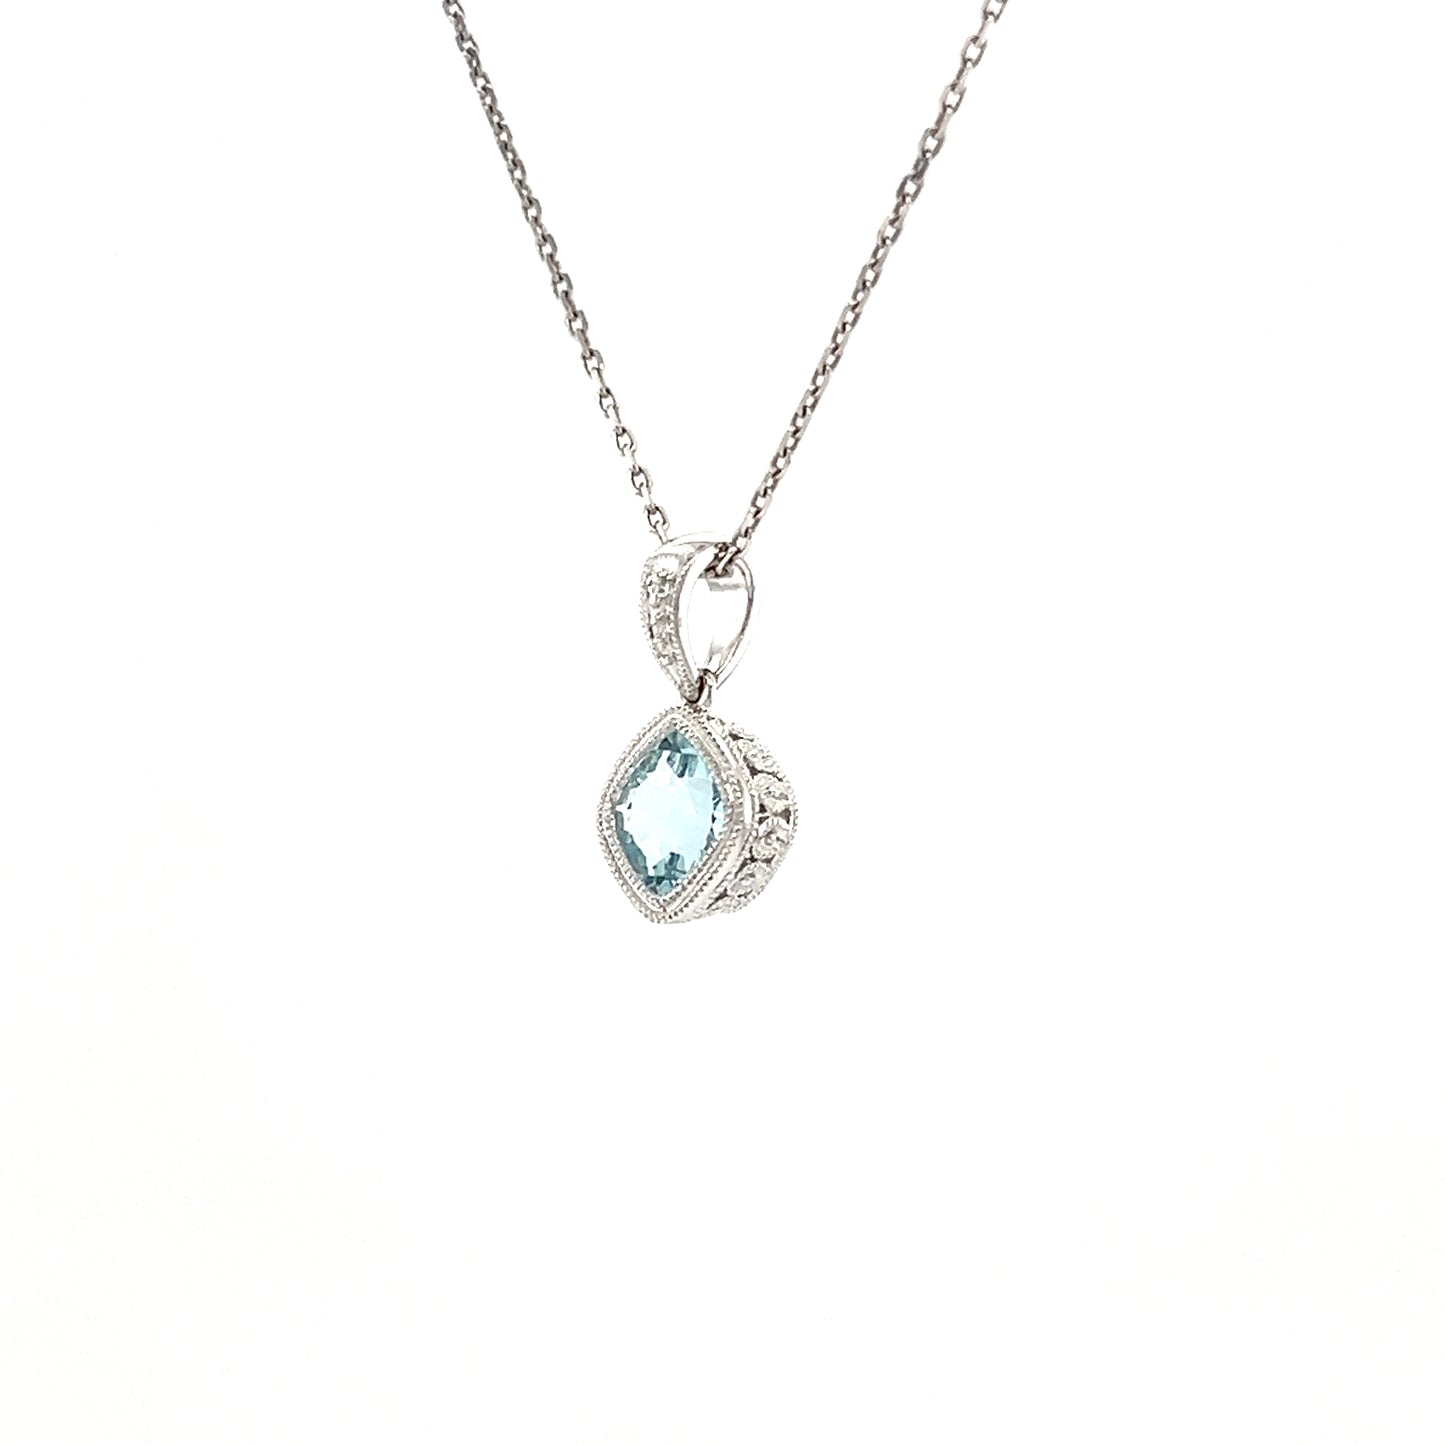 Cushion Aquamarine Pendant with Filigree and Milgrain Details in 14K White Gold Right Side View